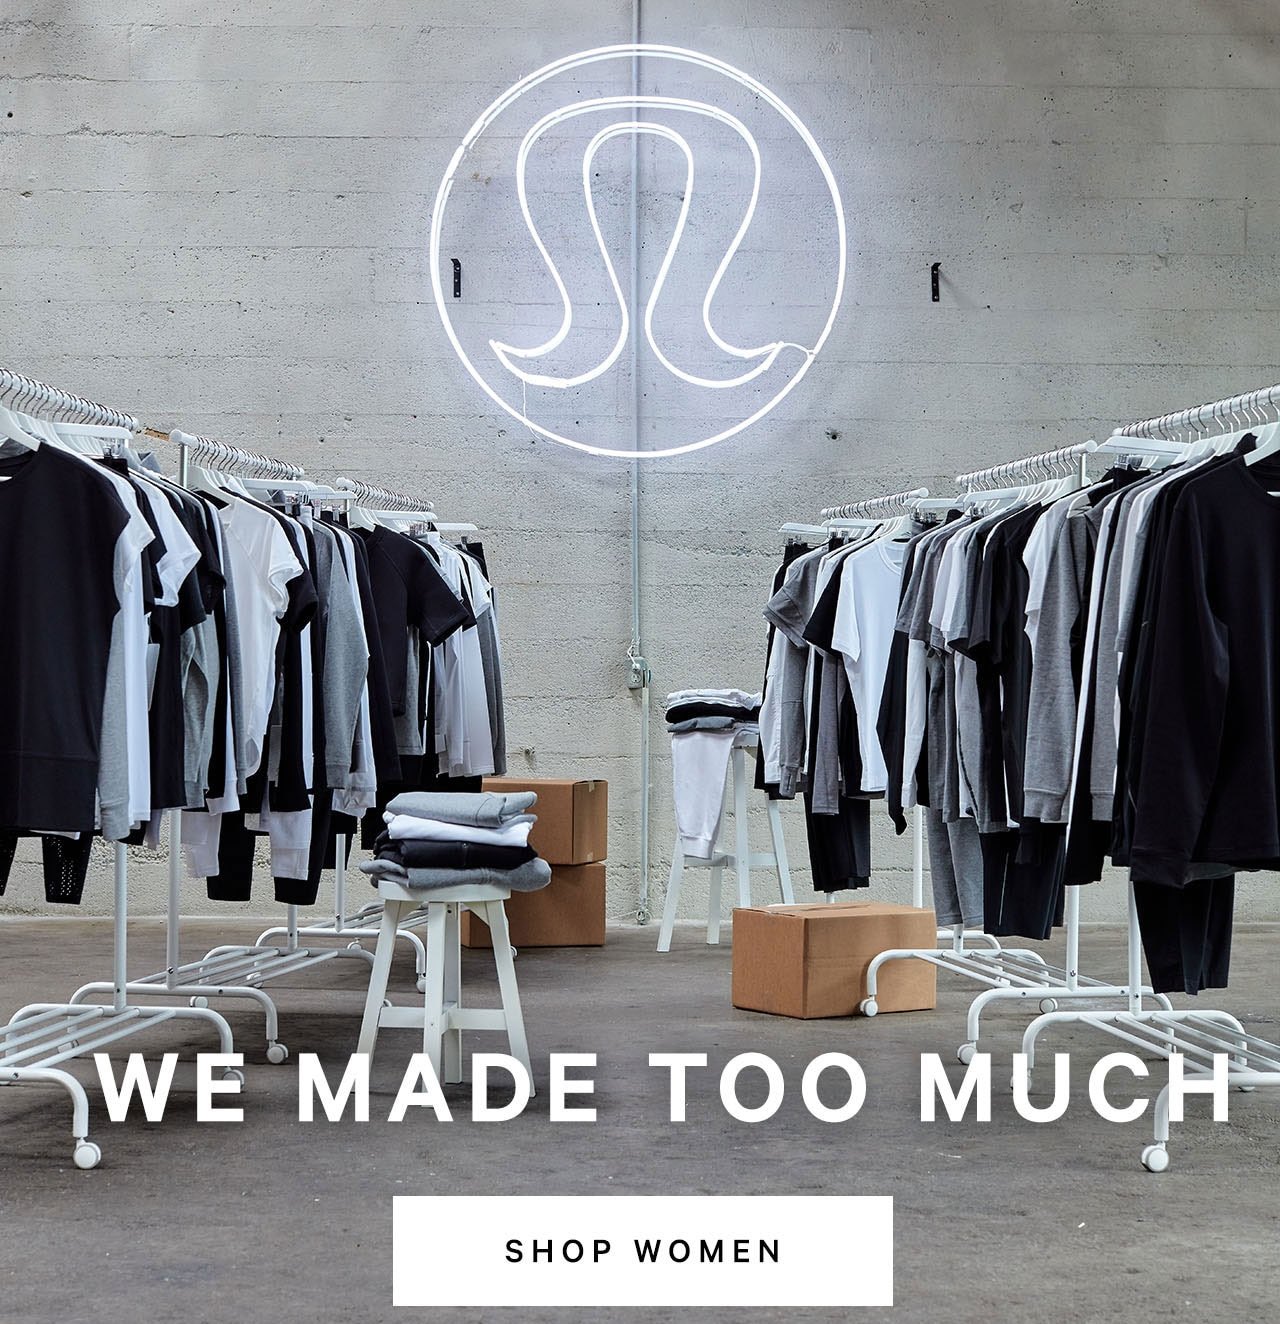 Danielle Vermeer on X: Lululemon “We Made Too Much” sale @lululemon is  discounting 1000s of extra activewear & athleisure items because they “made  too much” Is this just a cutesy name for